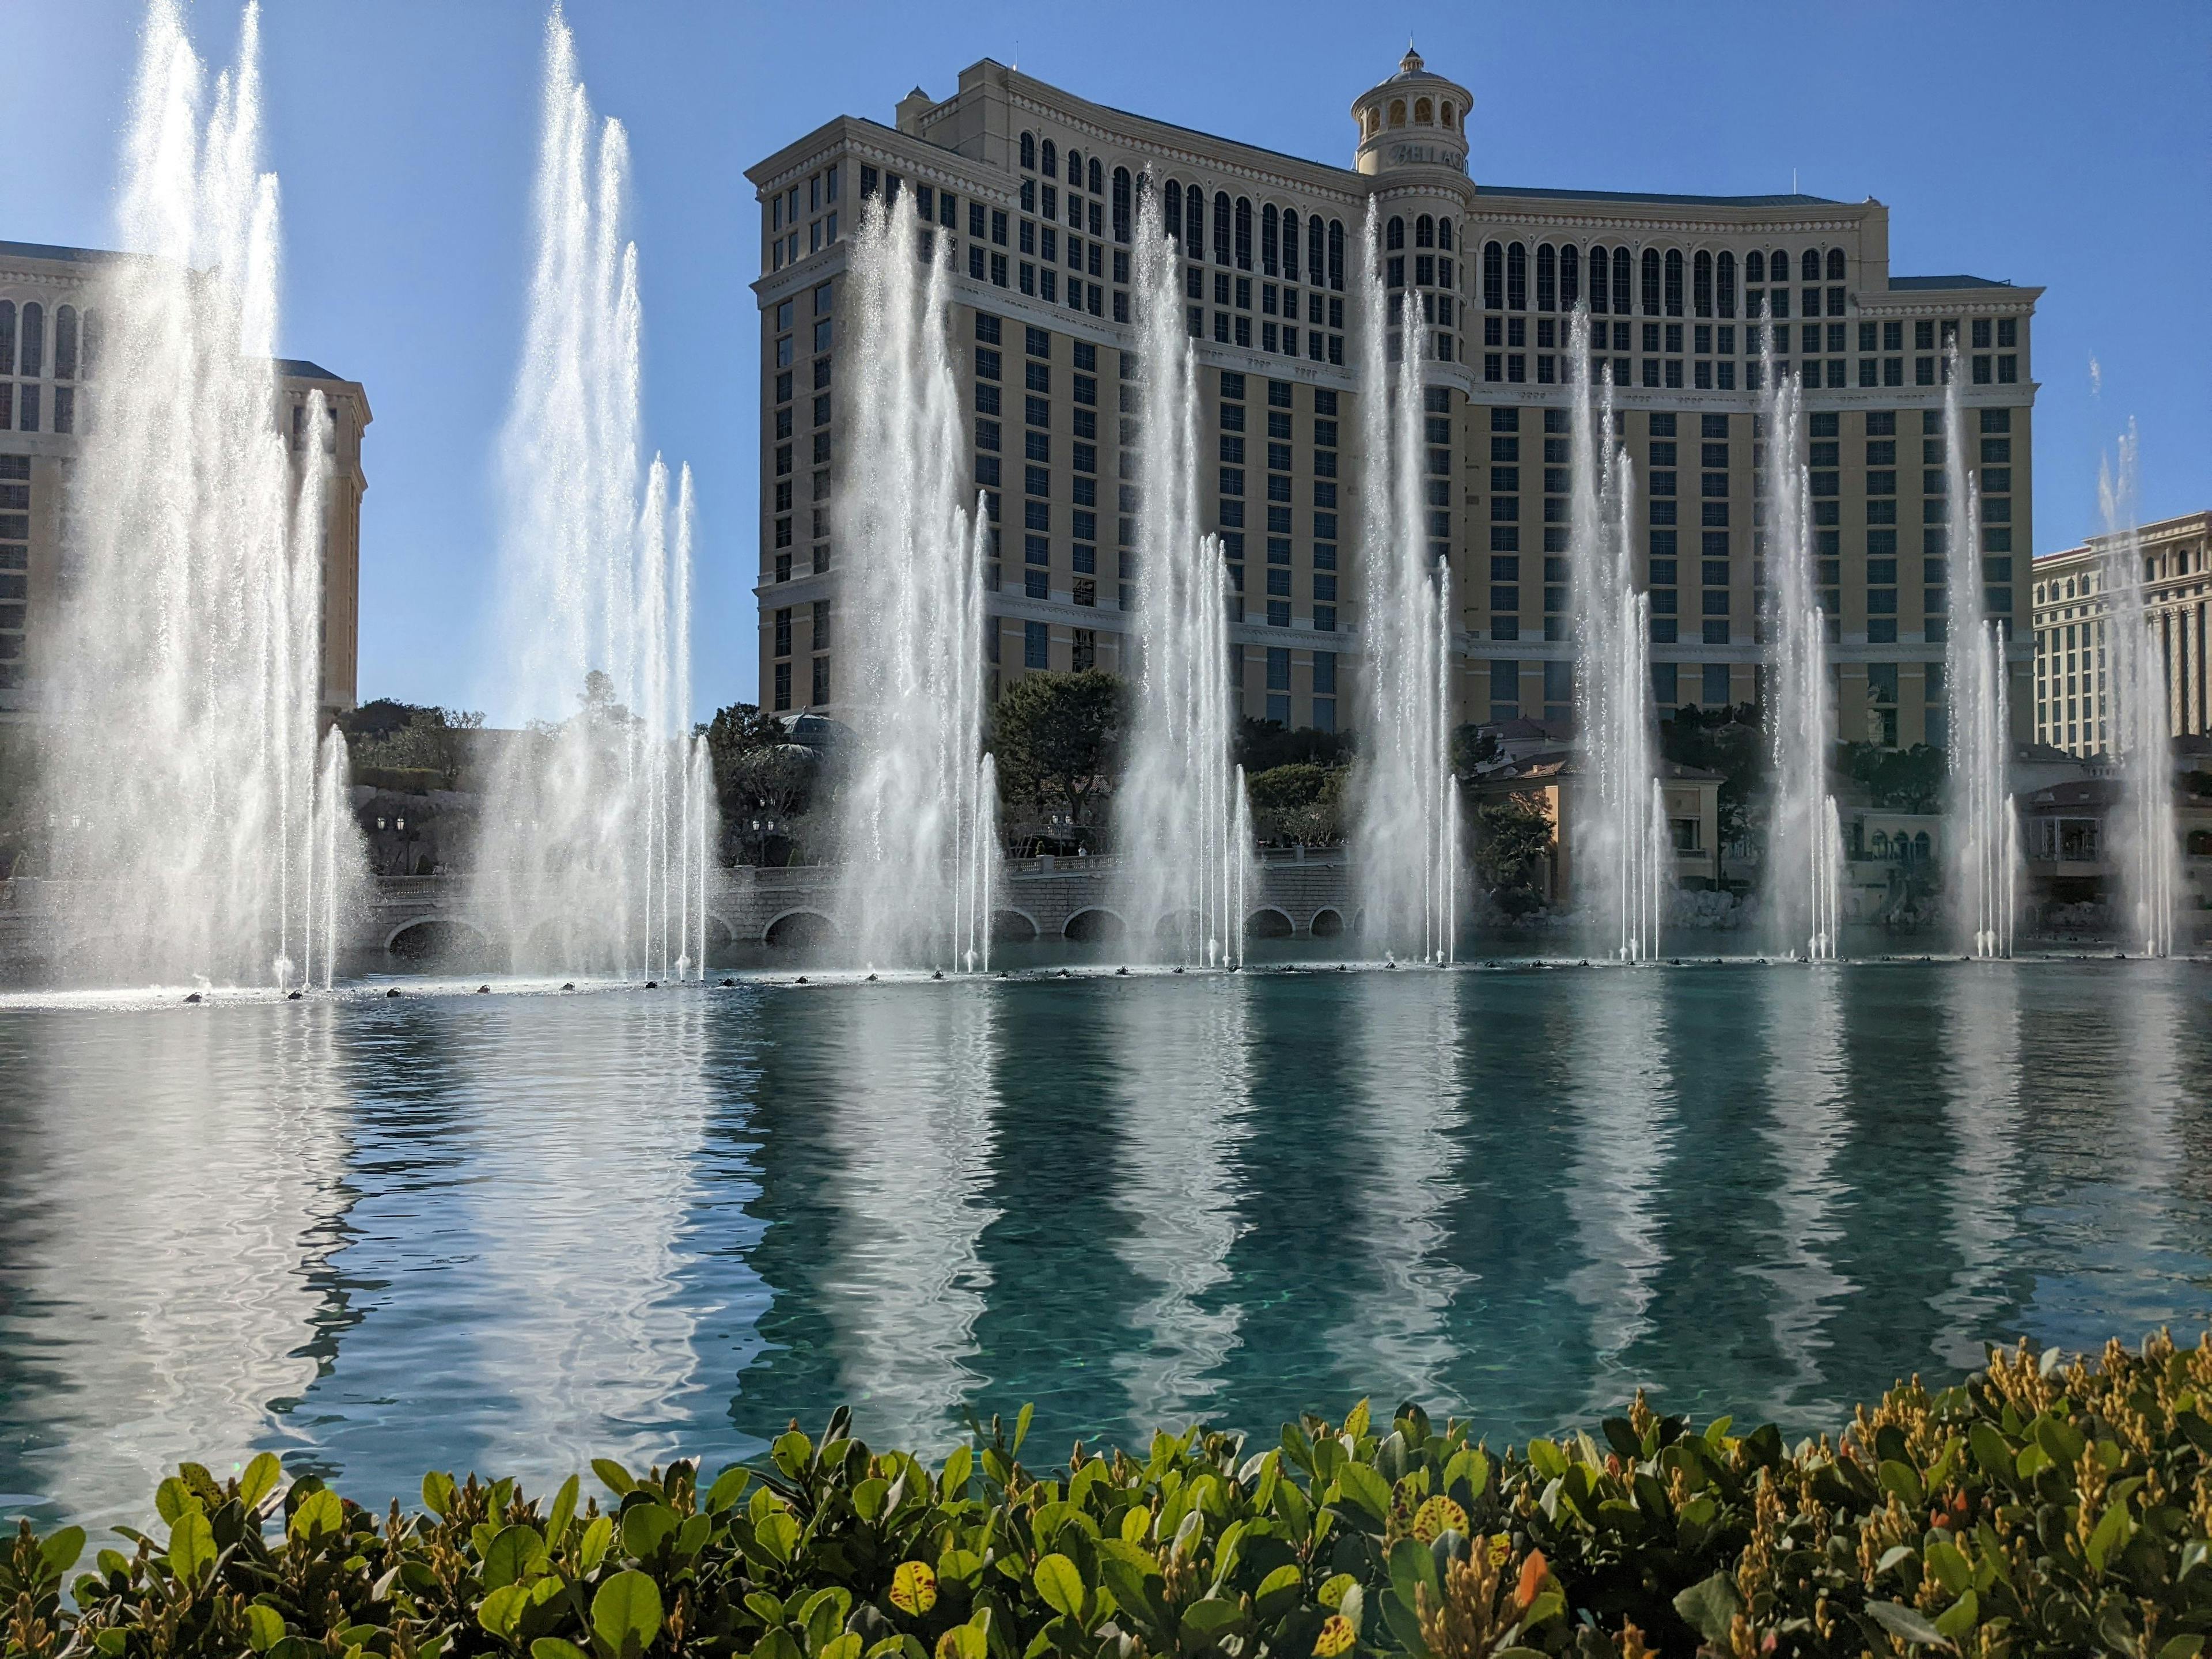 Famous fountains of the Bellagio Hotel in Las Vegas